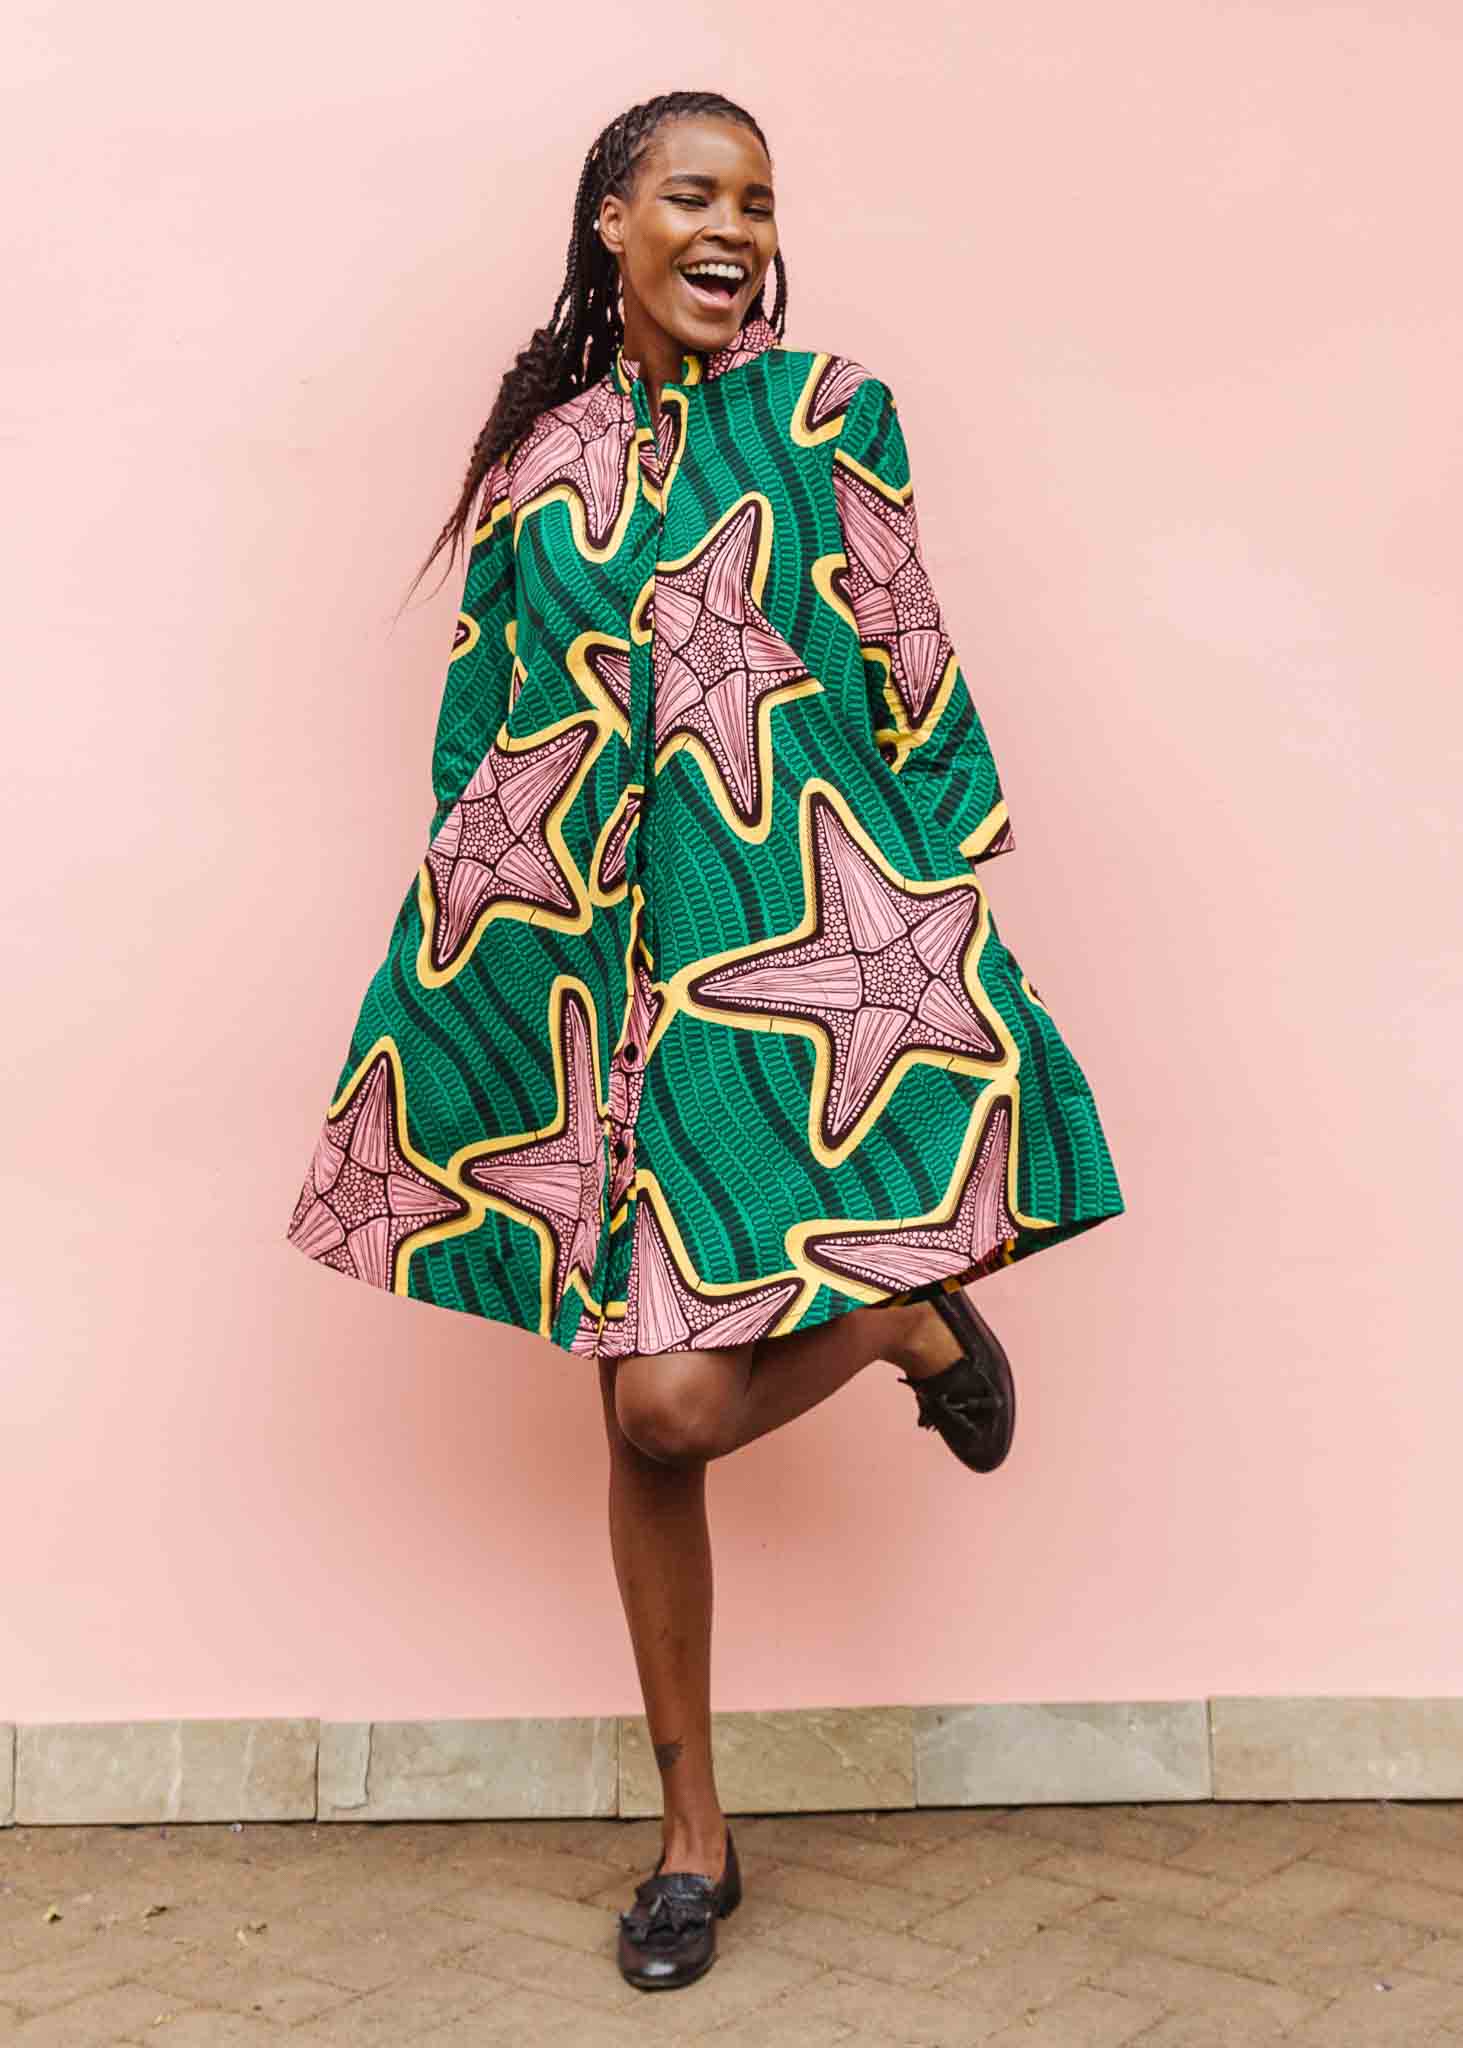 Model wearing green dress with brown and yellow star print.